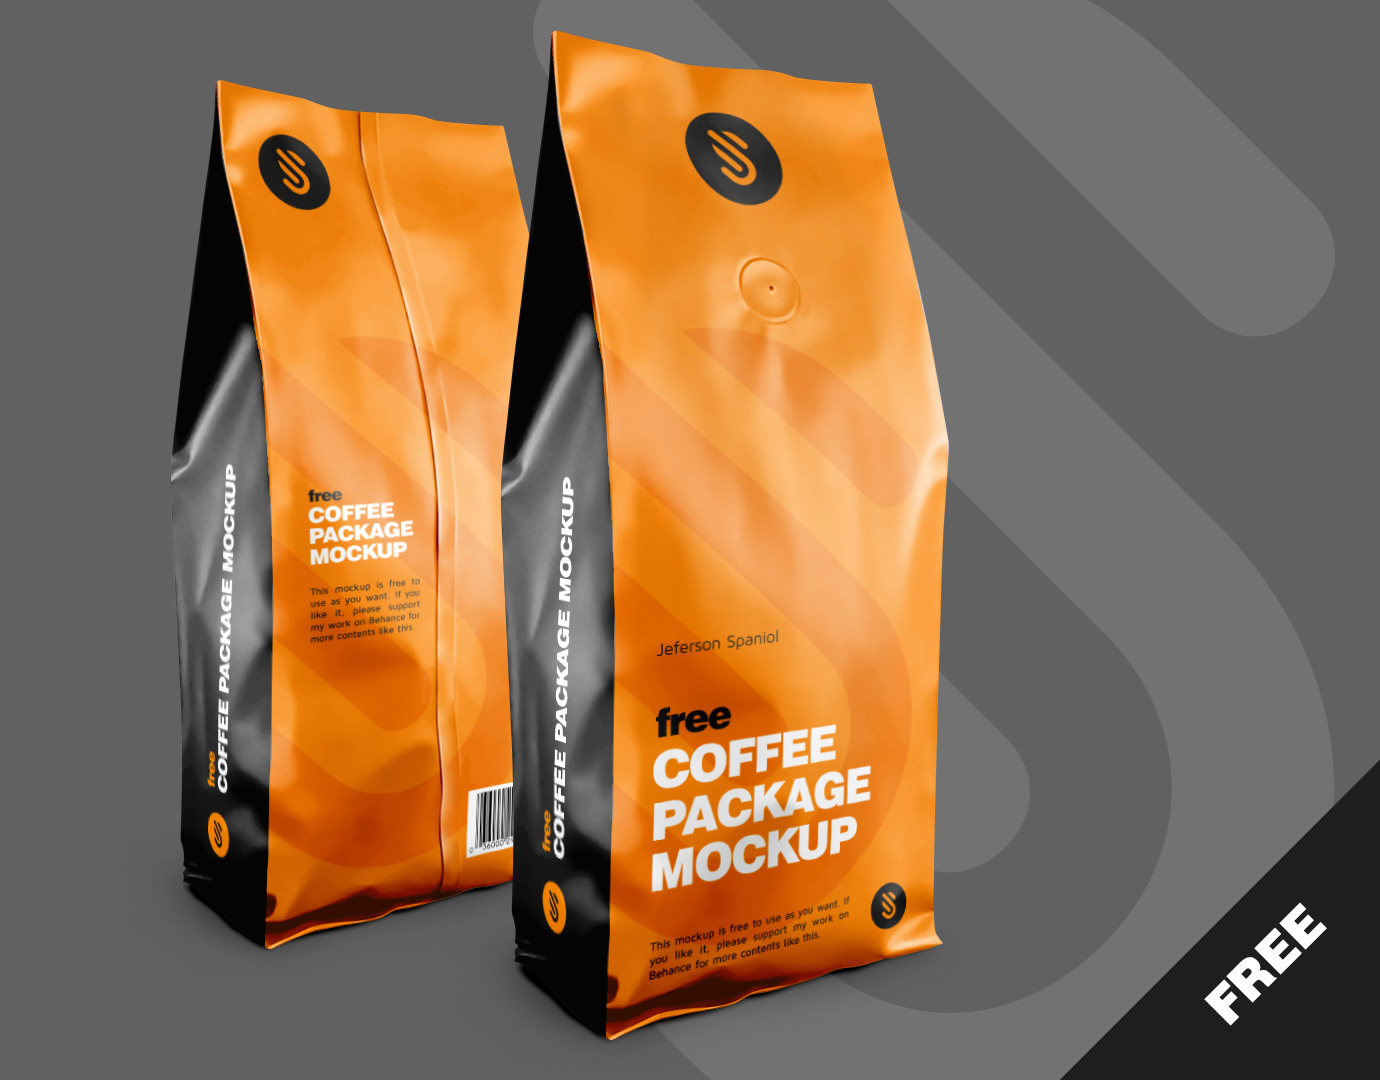 Download Mock Up Package Projects Photos Videos Logos Illustrations And Branding On Behance Yellowimages Mockups